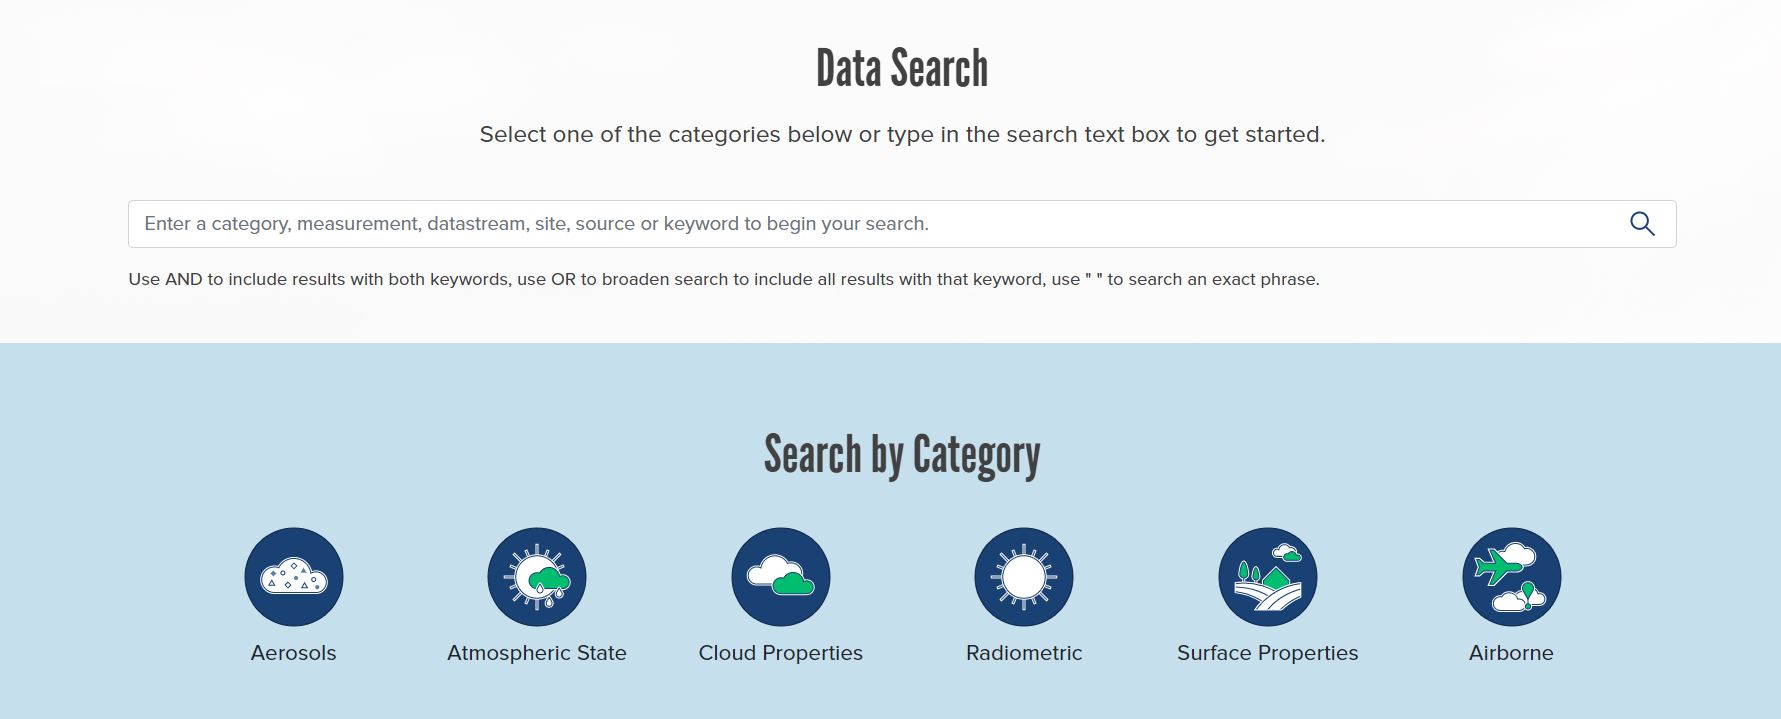 A screen grab from Data Discovery shows a search bar where a user could type in a category, measurement, datastream, site, source, or keyword, and a separate search section by category.